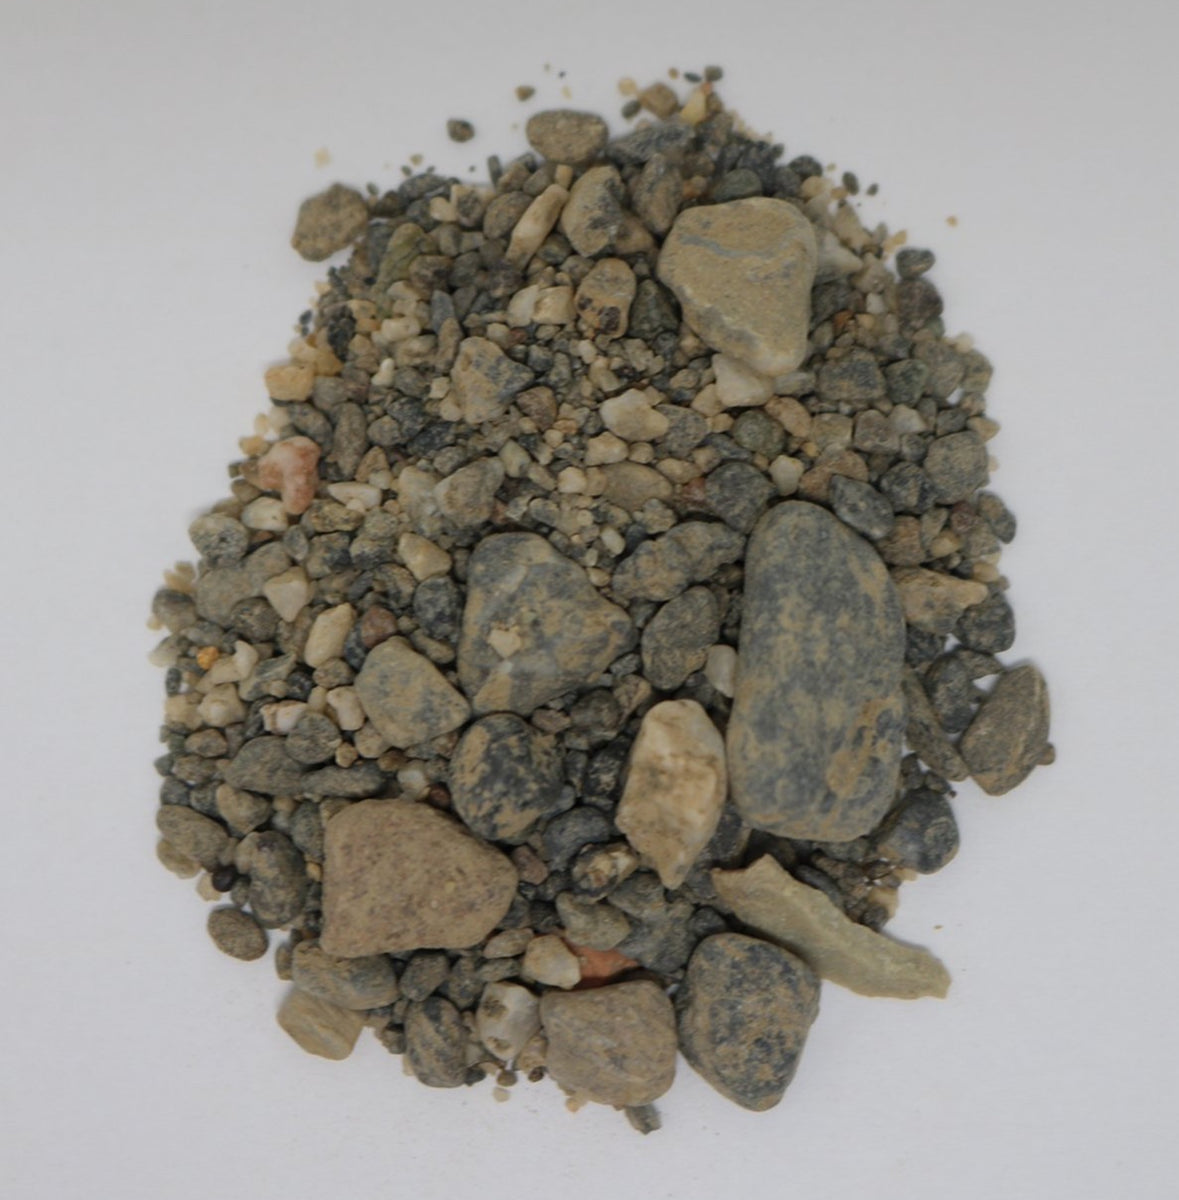 1.LB of Gold Paydirt Explorer Series North American Ancient River Bed –  Irwin's Paydirt